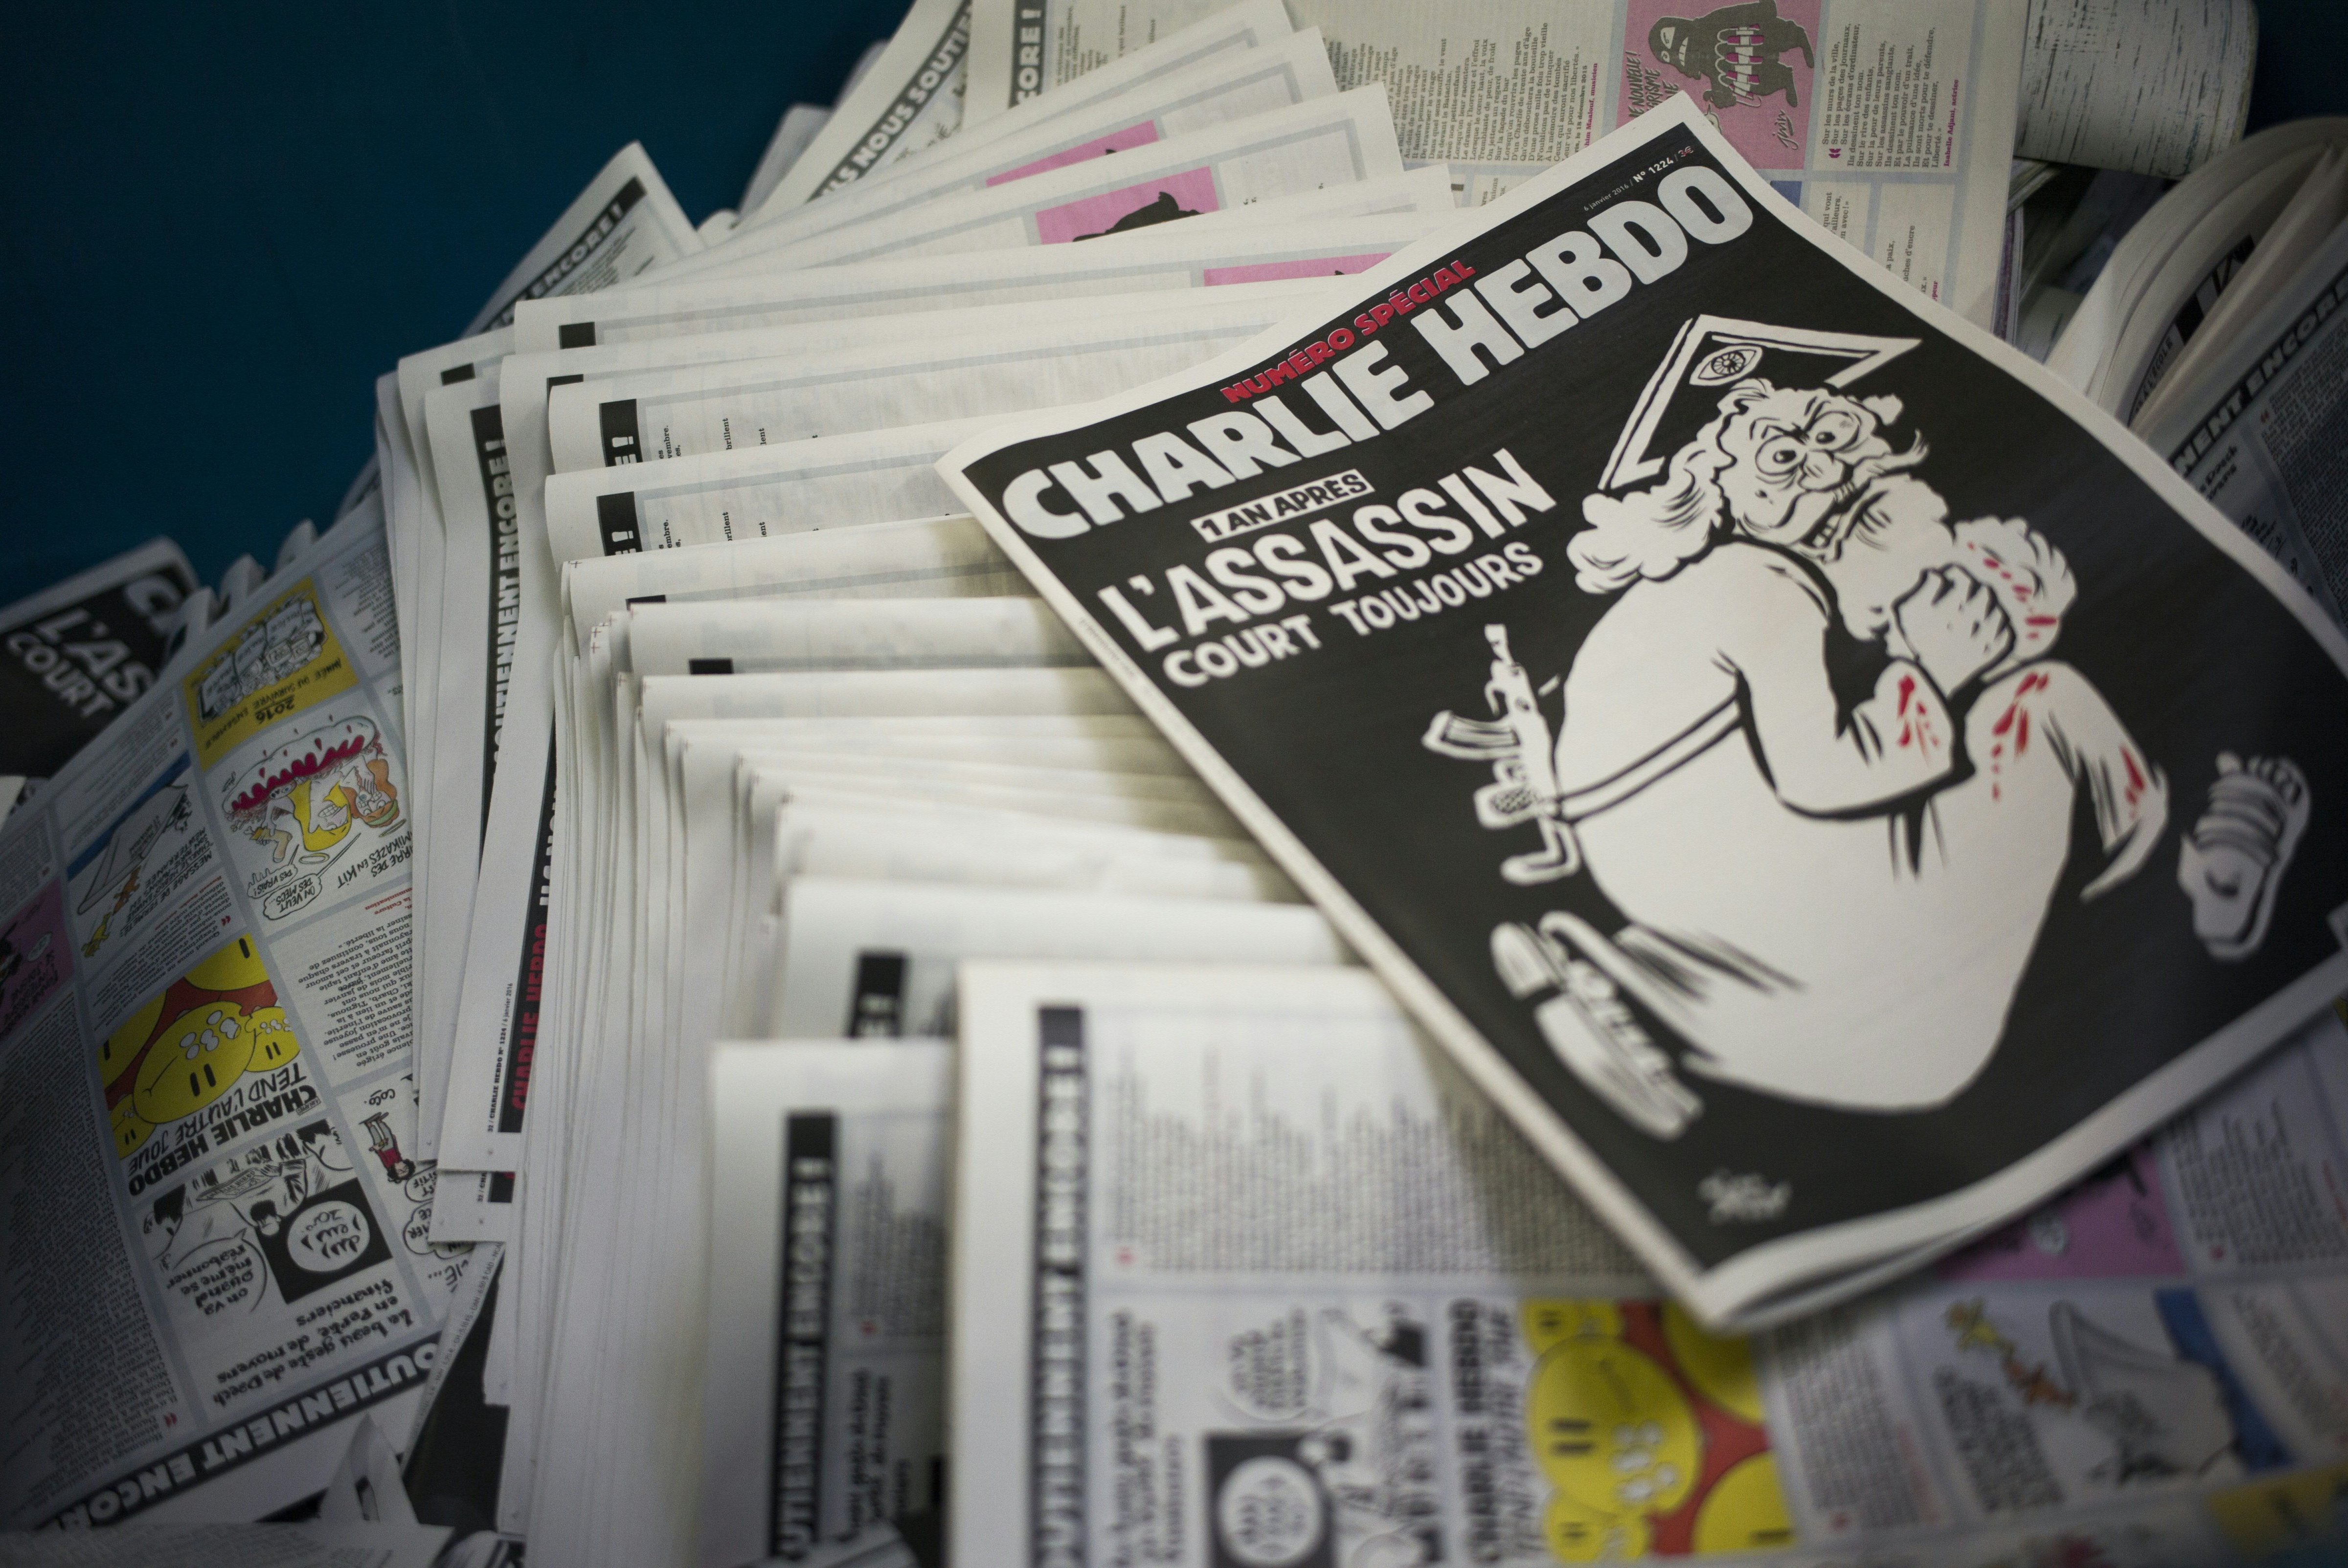 The latest edition of Charlie Hebdo is seen at a printing house near Paris on Jan. 4, 2016. (Martin Bureau—AFP/Getty Images)